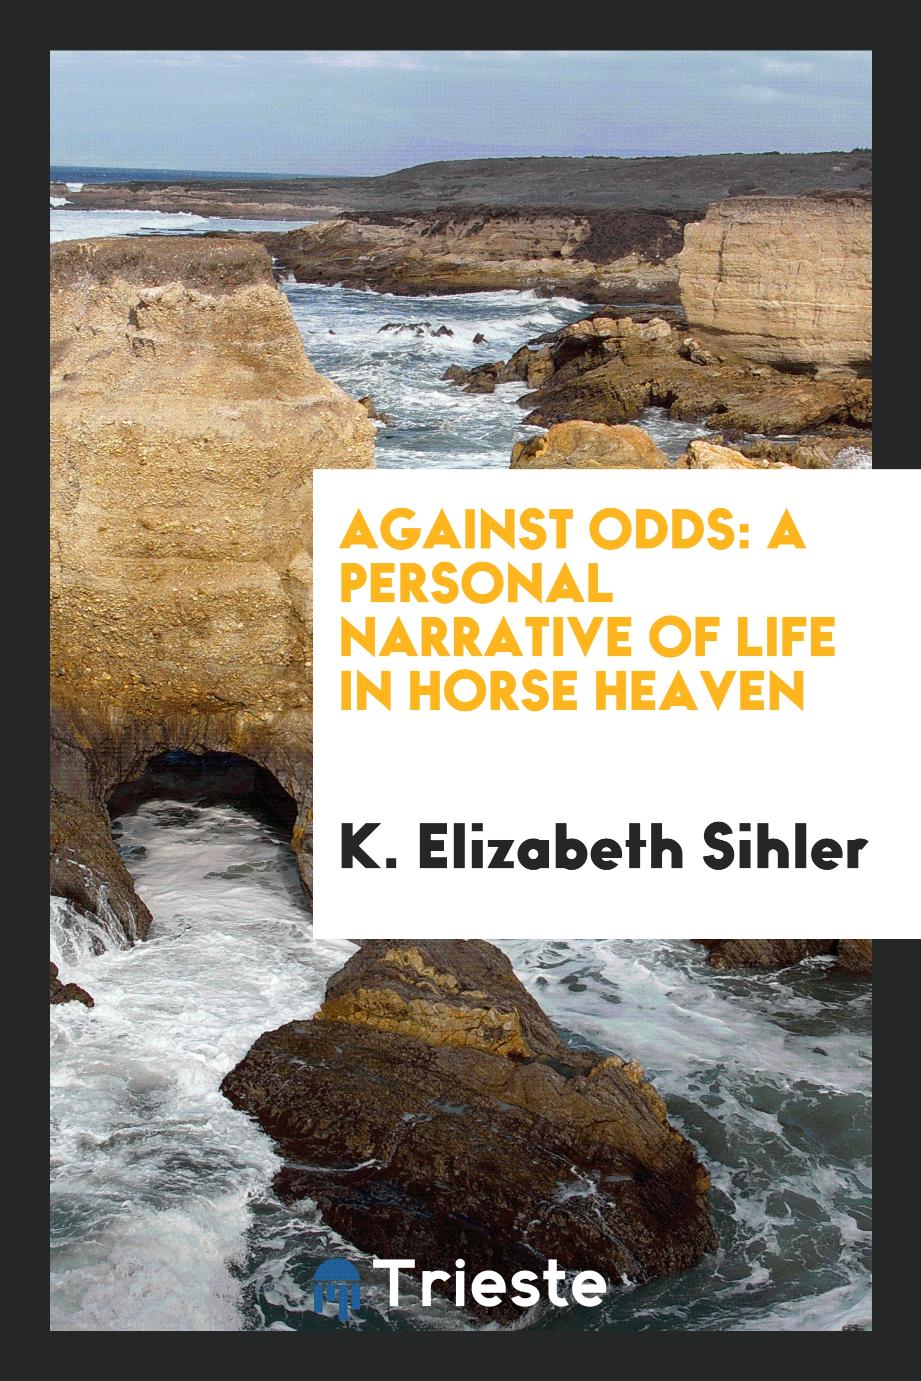 Against Odds: A Personal Narrative of Life in Horse Heaven